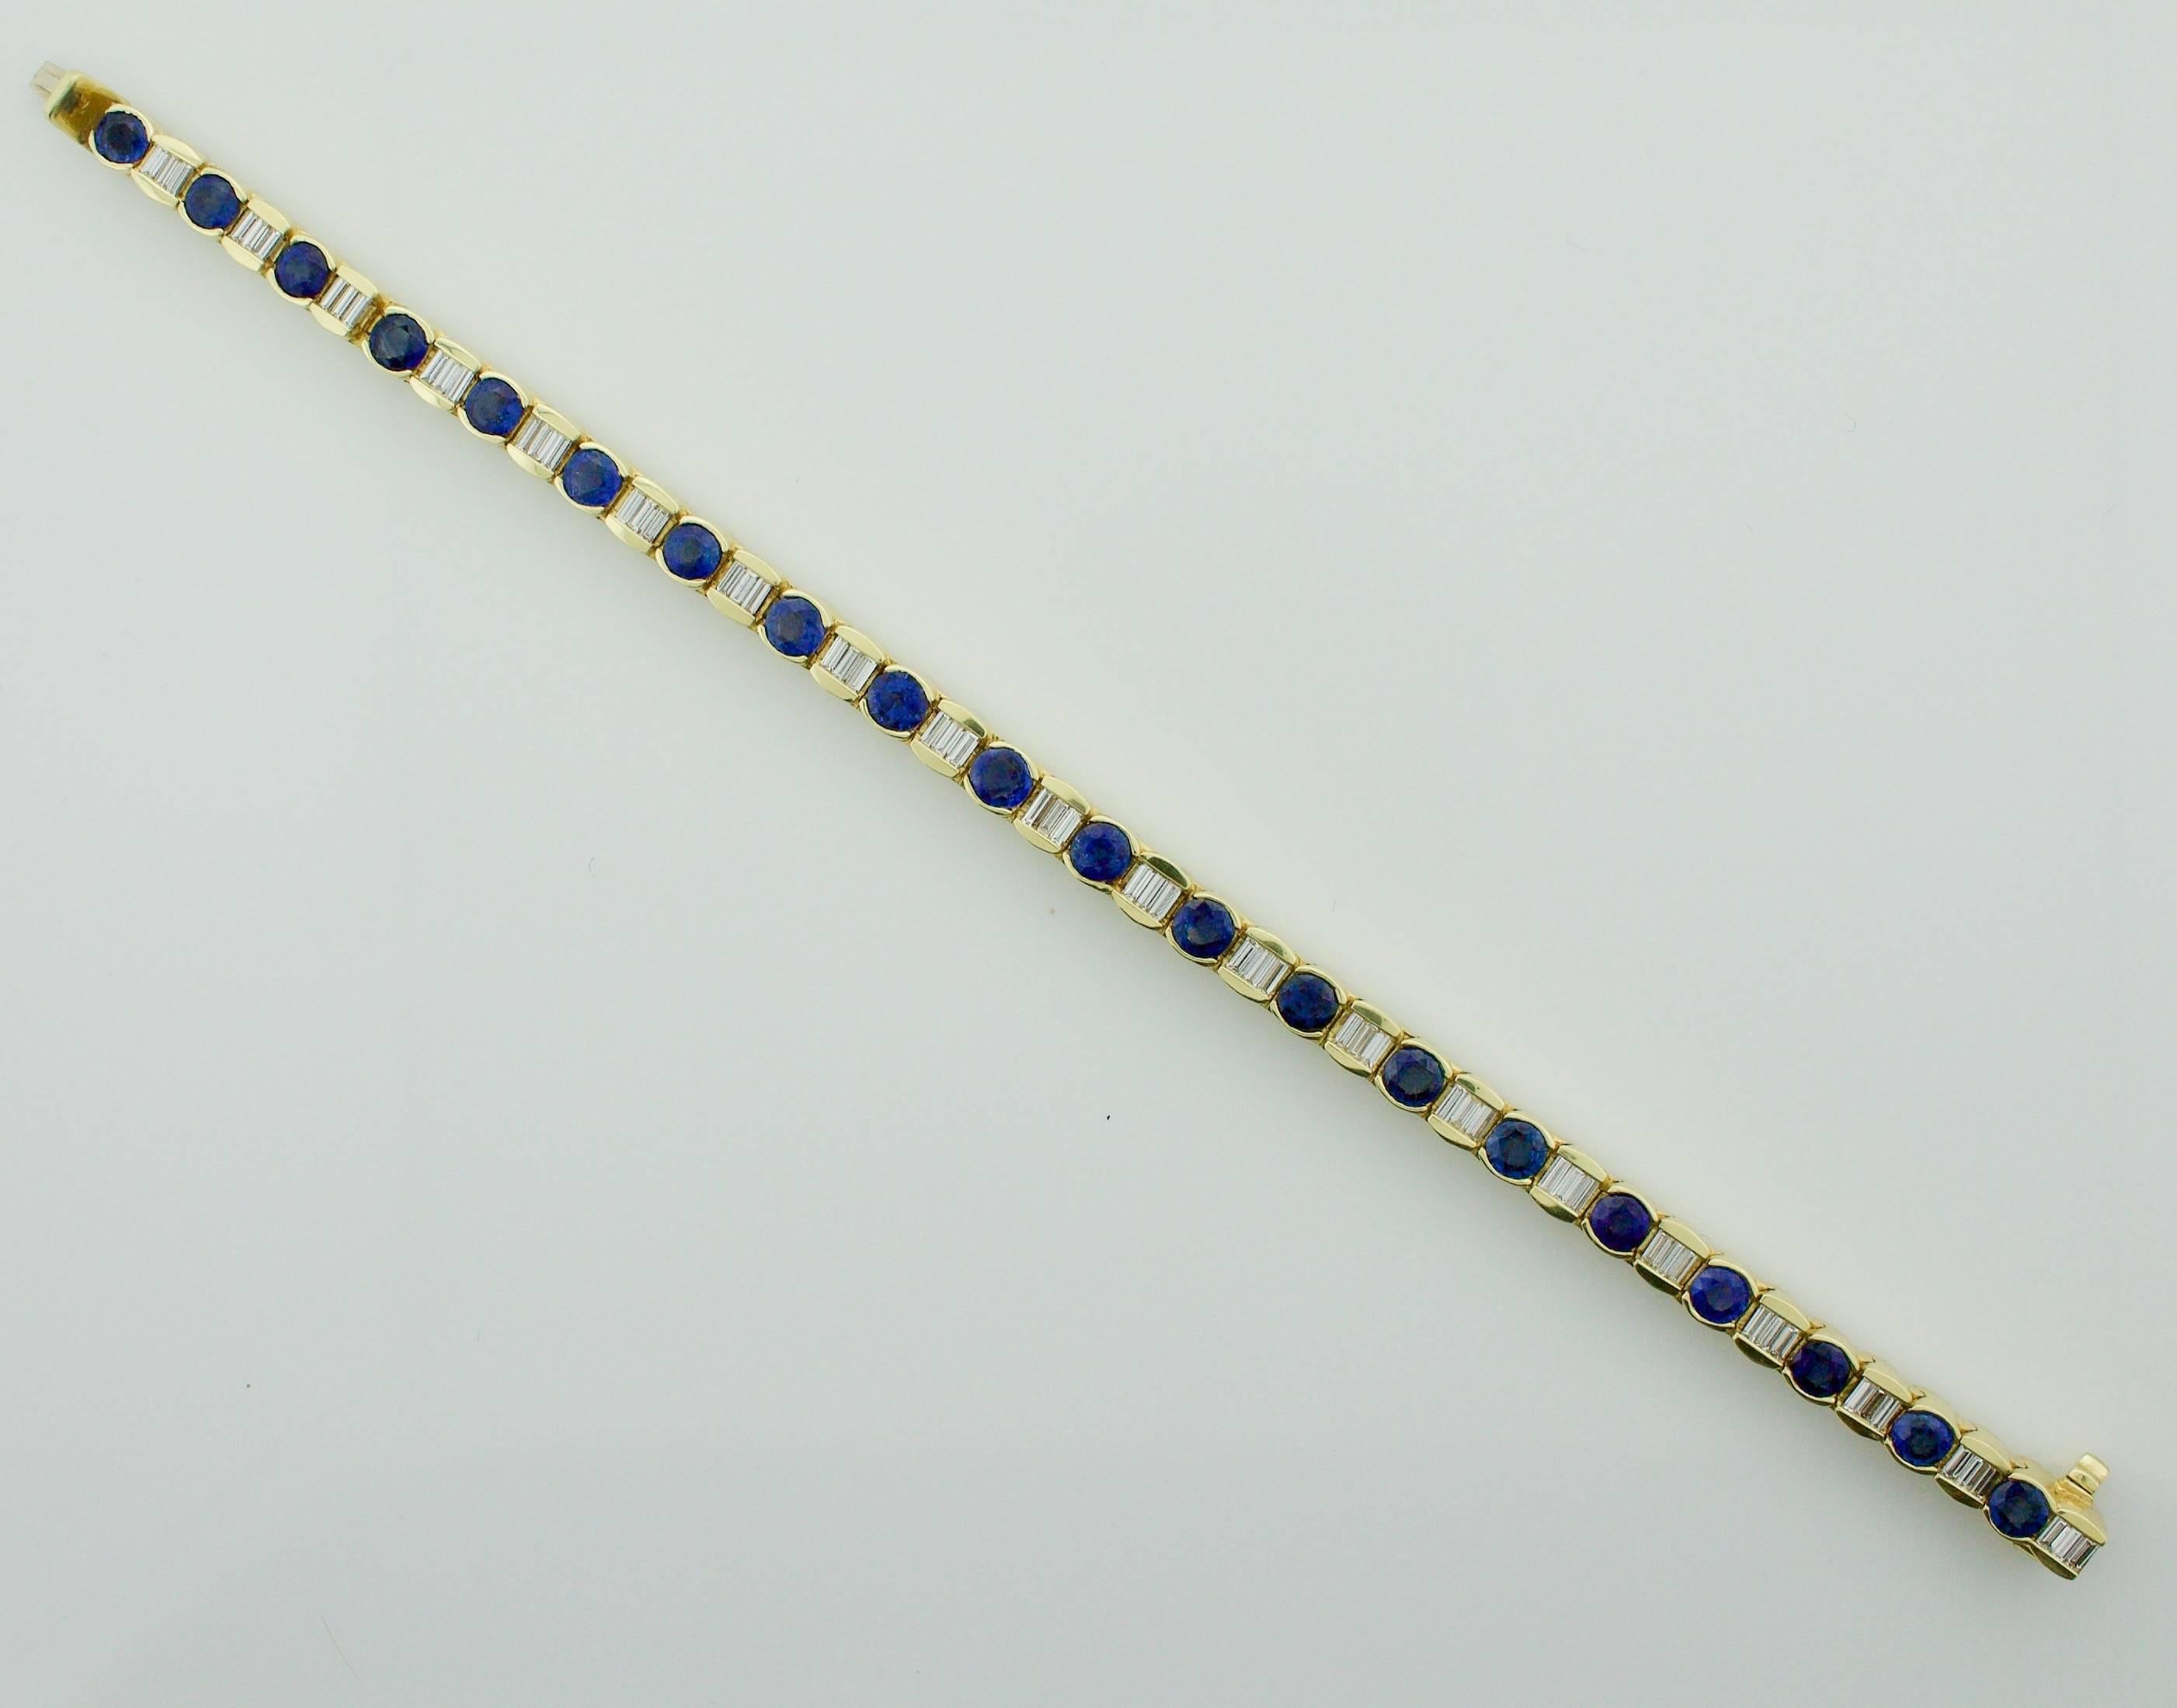 Sapphire and Diamond Tennis Bracelet in 18k
Twenty Round Sapphires weighing 6.00 carats approximately [Bright Blue with no imperfections visible to the naked eye]
Sixty Baguette Cut Diamonds weighing 1.80 carats approximately [GH VVS-VS]]
Solid